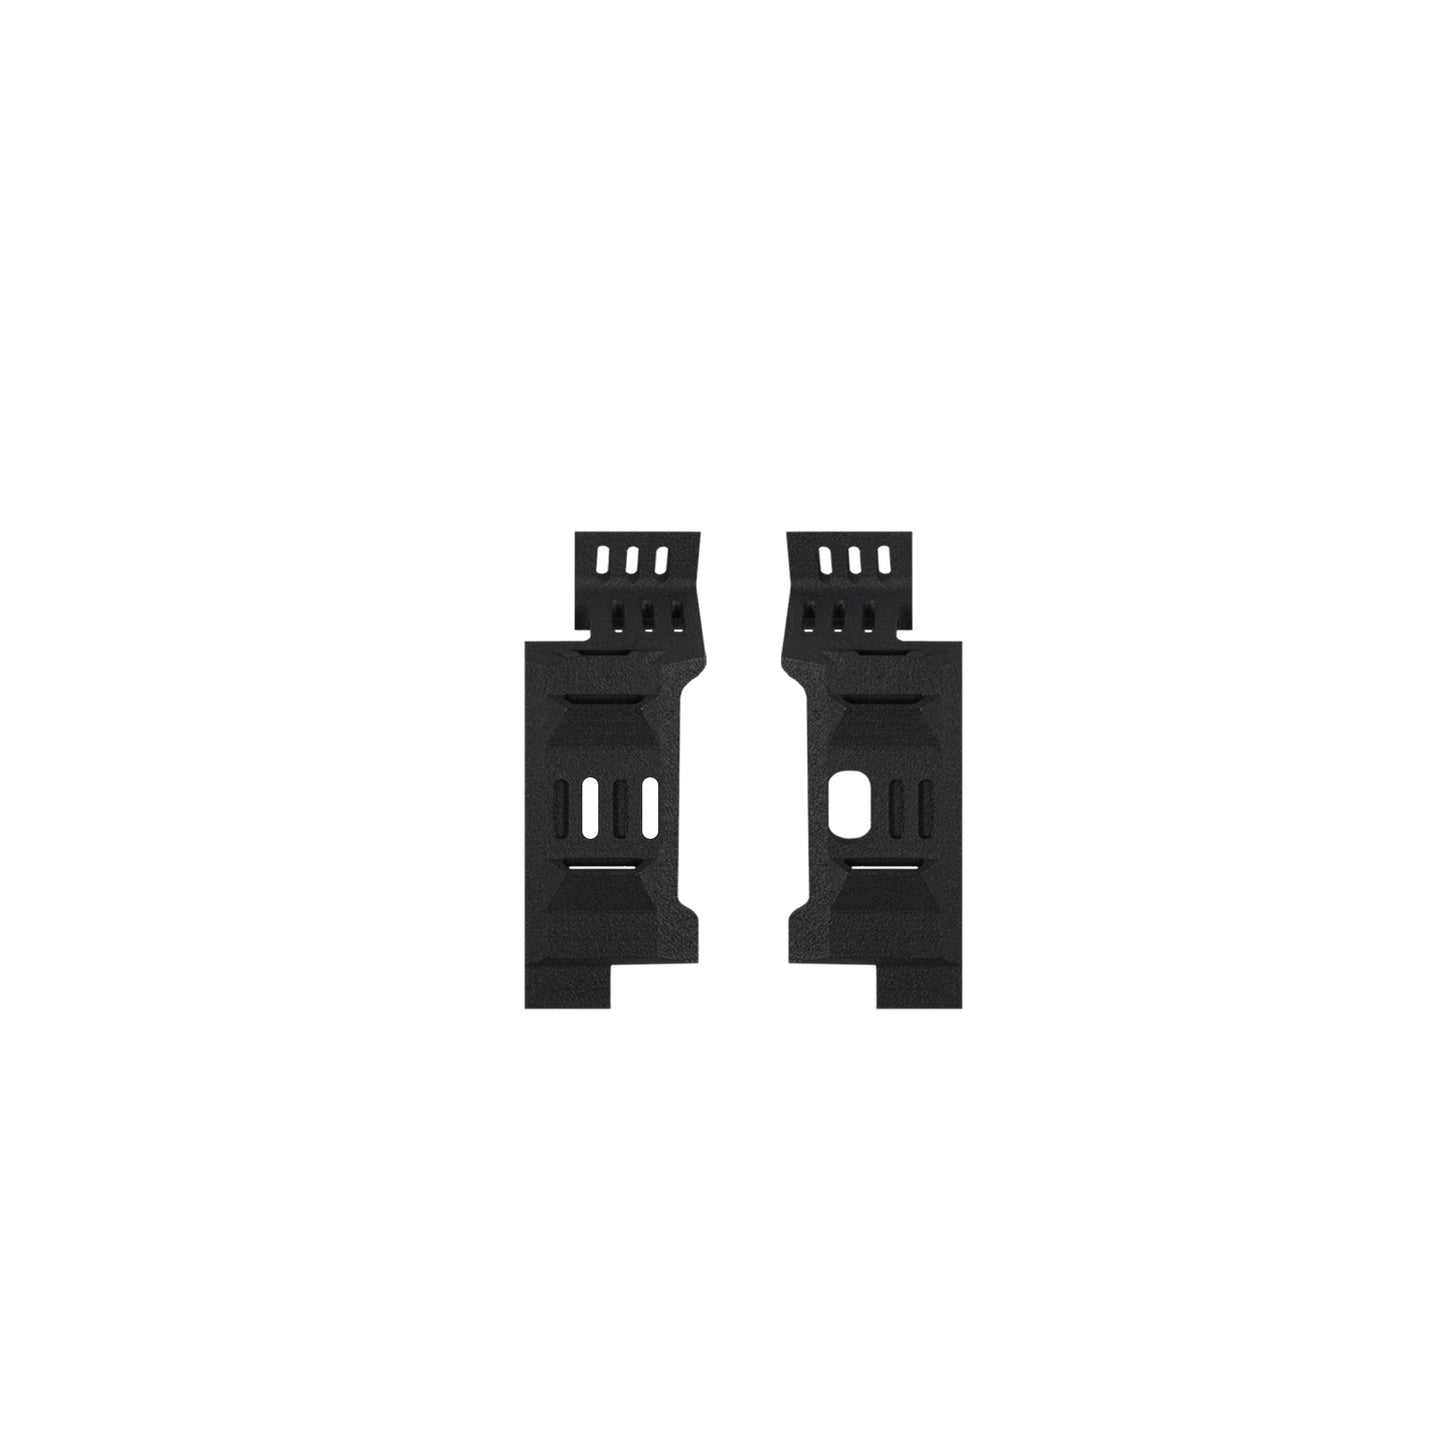 GEPRC GEP-LC75 V3 Frame Parts - Suitable for Crocodile75 V3 Drone RC DIY FPV Quadcopter Drone Replacement Accessories Parts